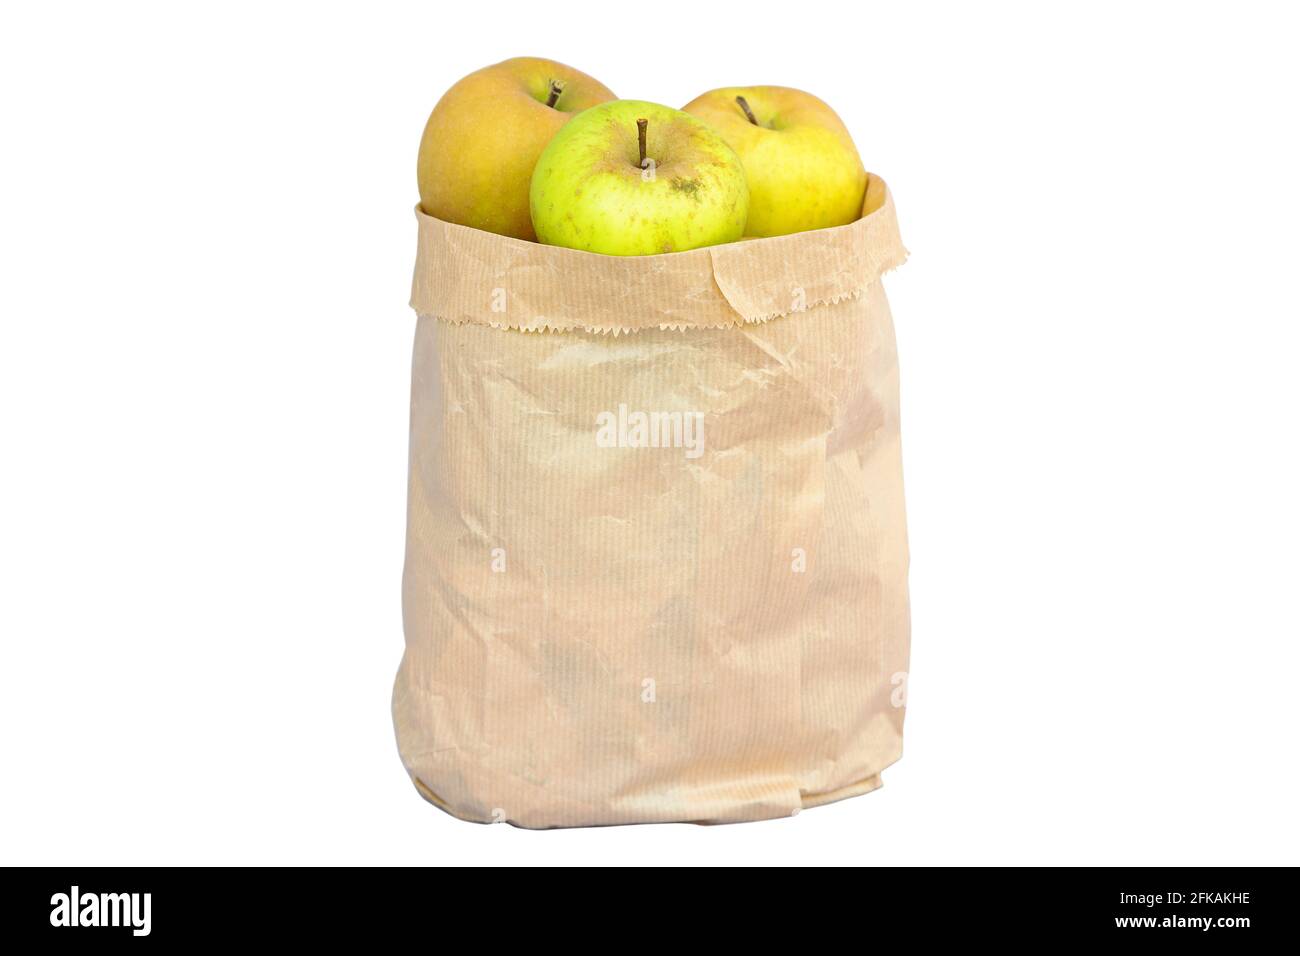 Imperfect looking organic apples with unconventionally raised method, no genetically modified organism techniques, in brown grocery bag. Stock Photo